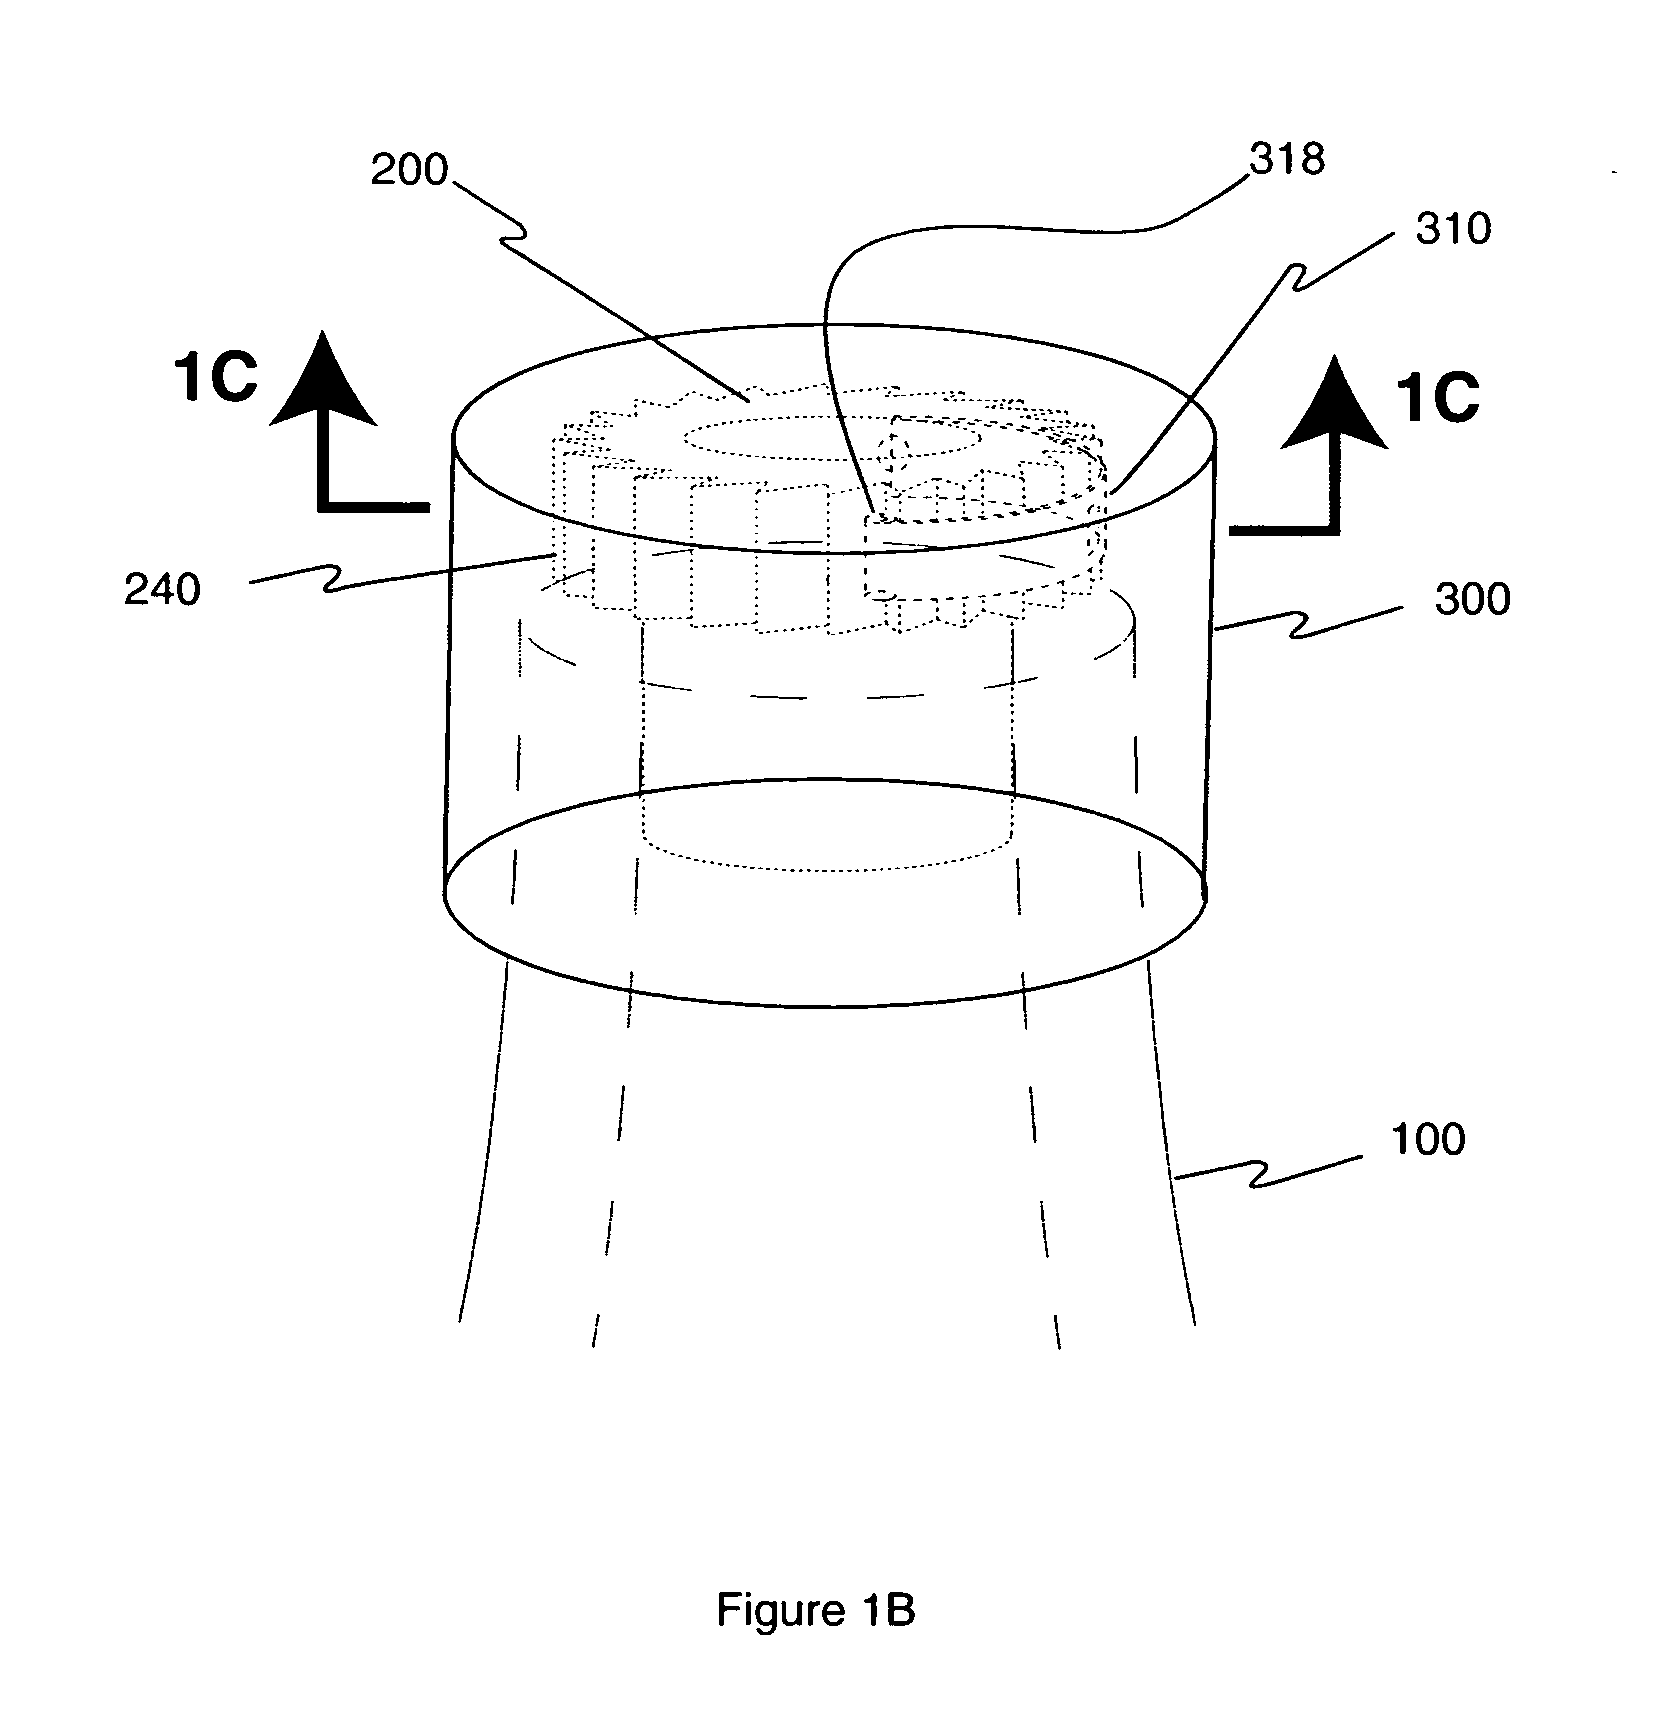 Apparatus for electronically verifying the authenticity of contents within a container